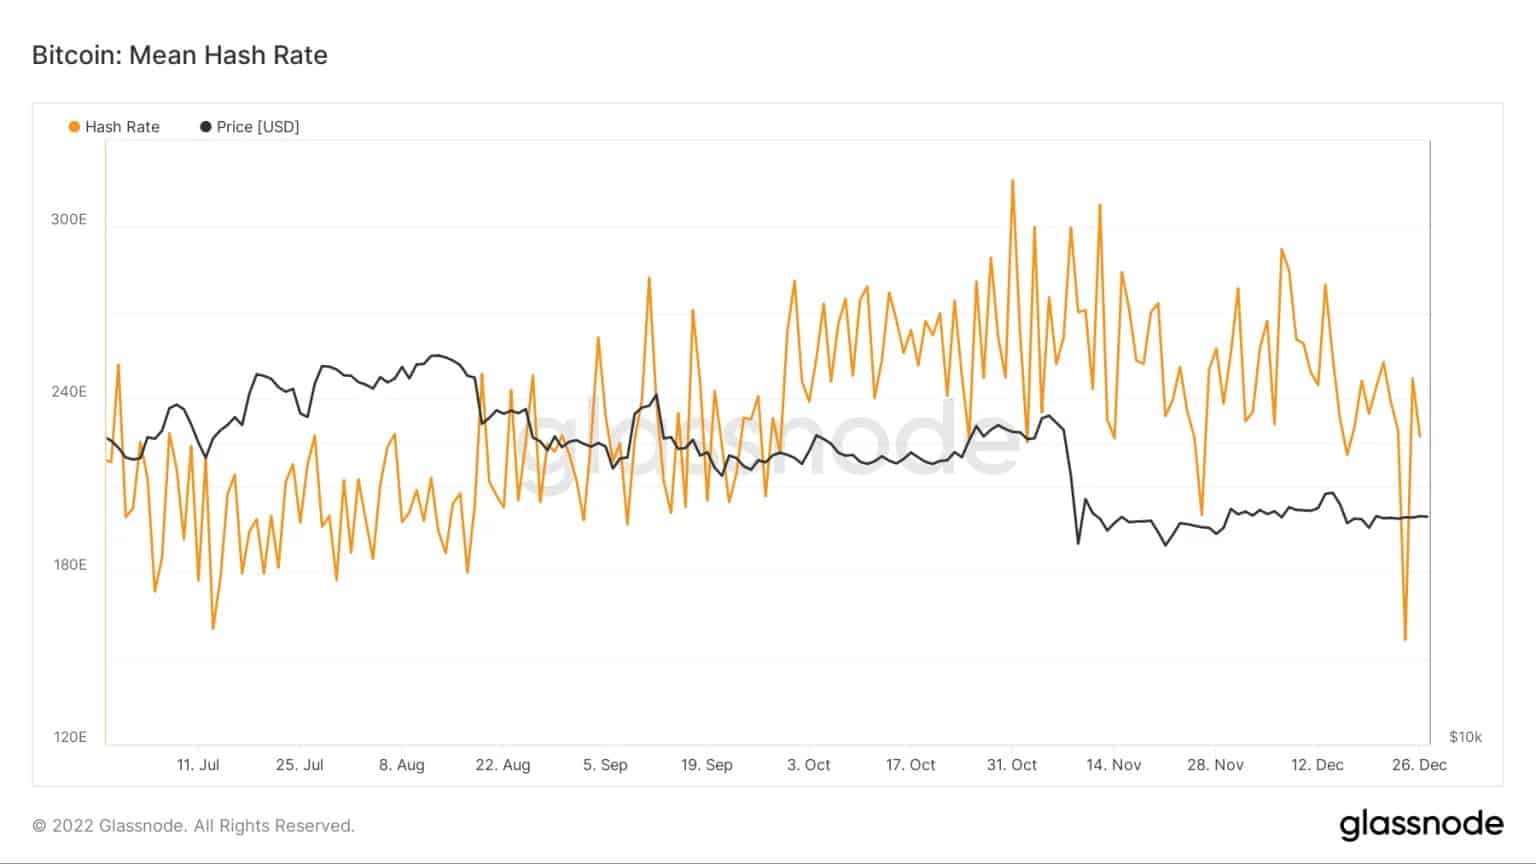 Hashrate (orange) and price (black) of Bitcoin over the last 6 months